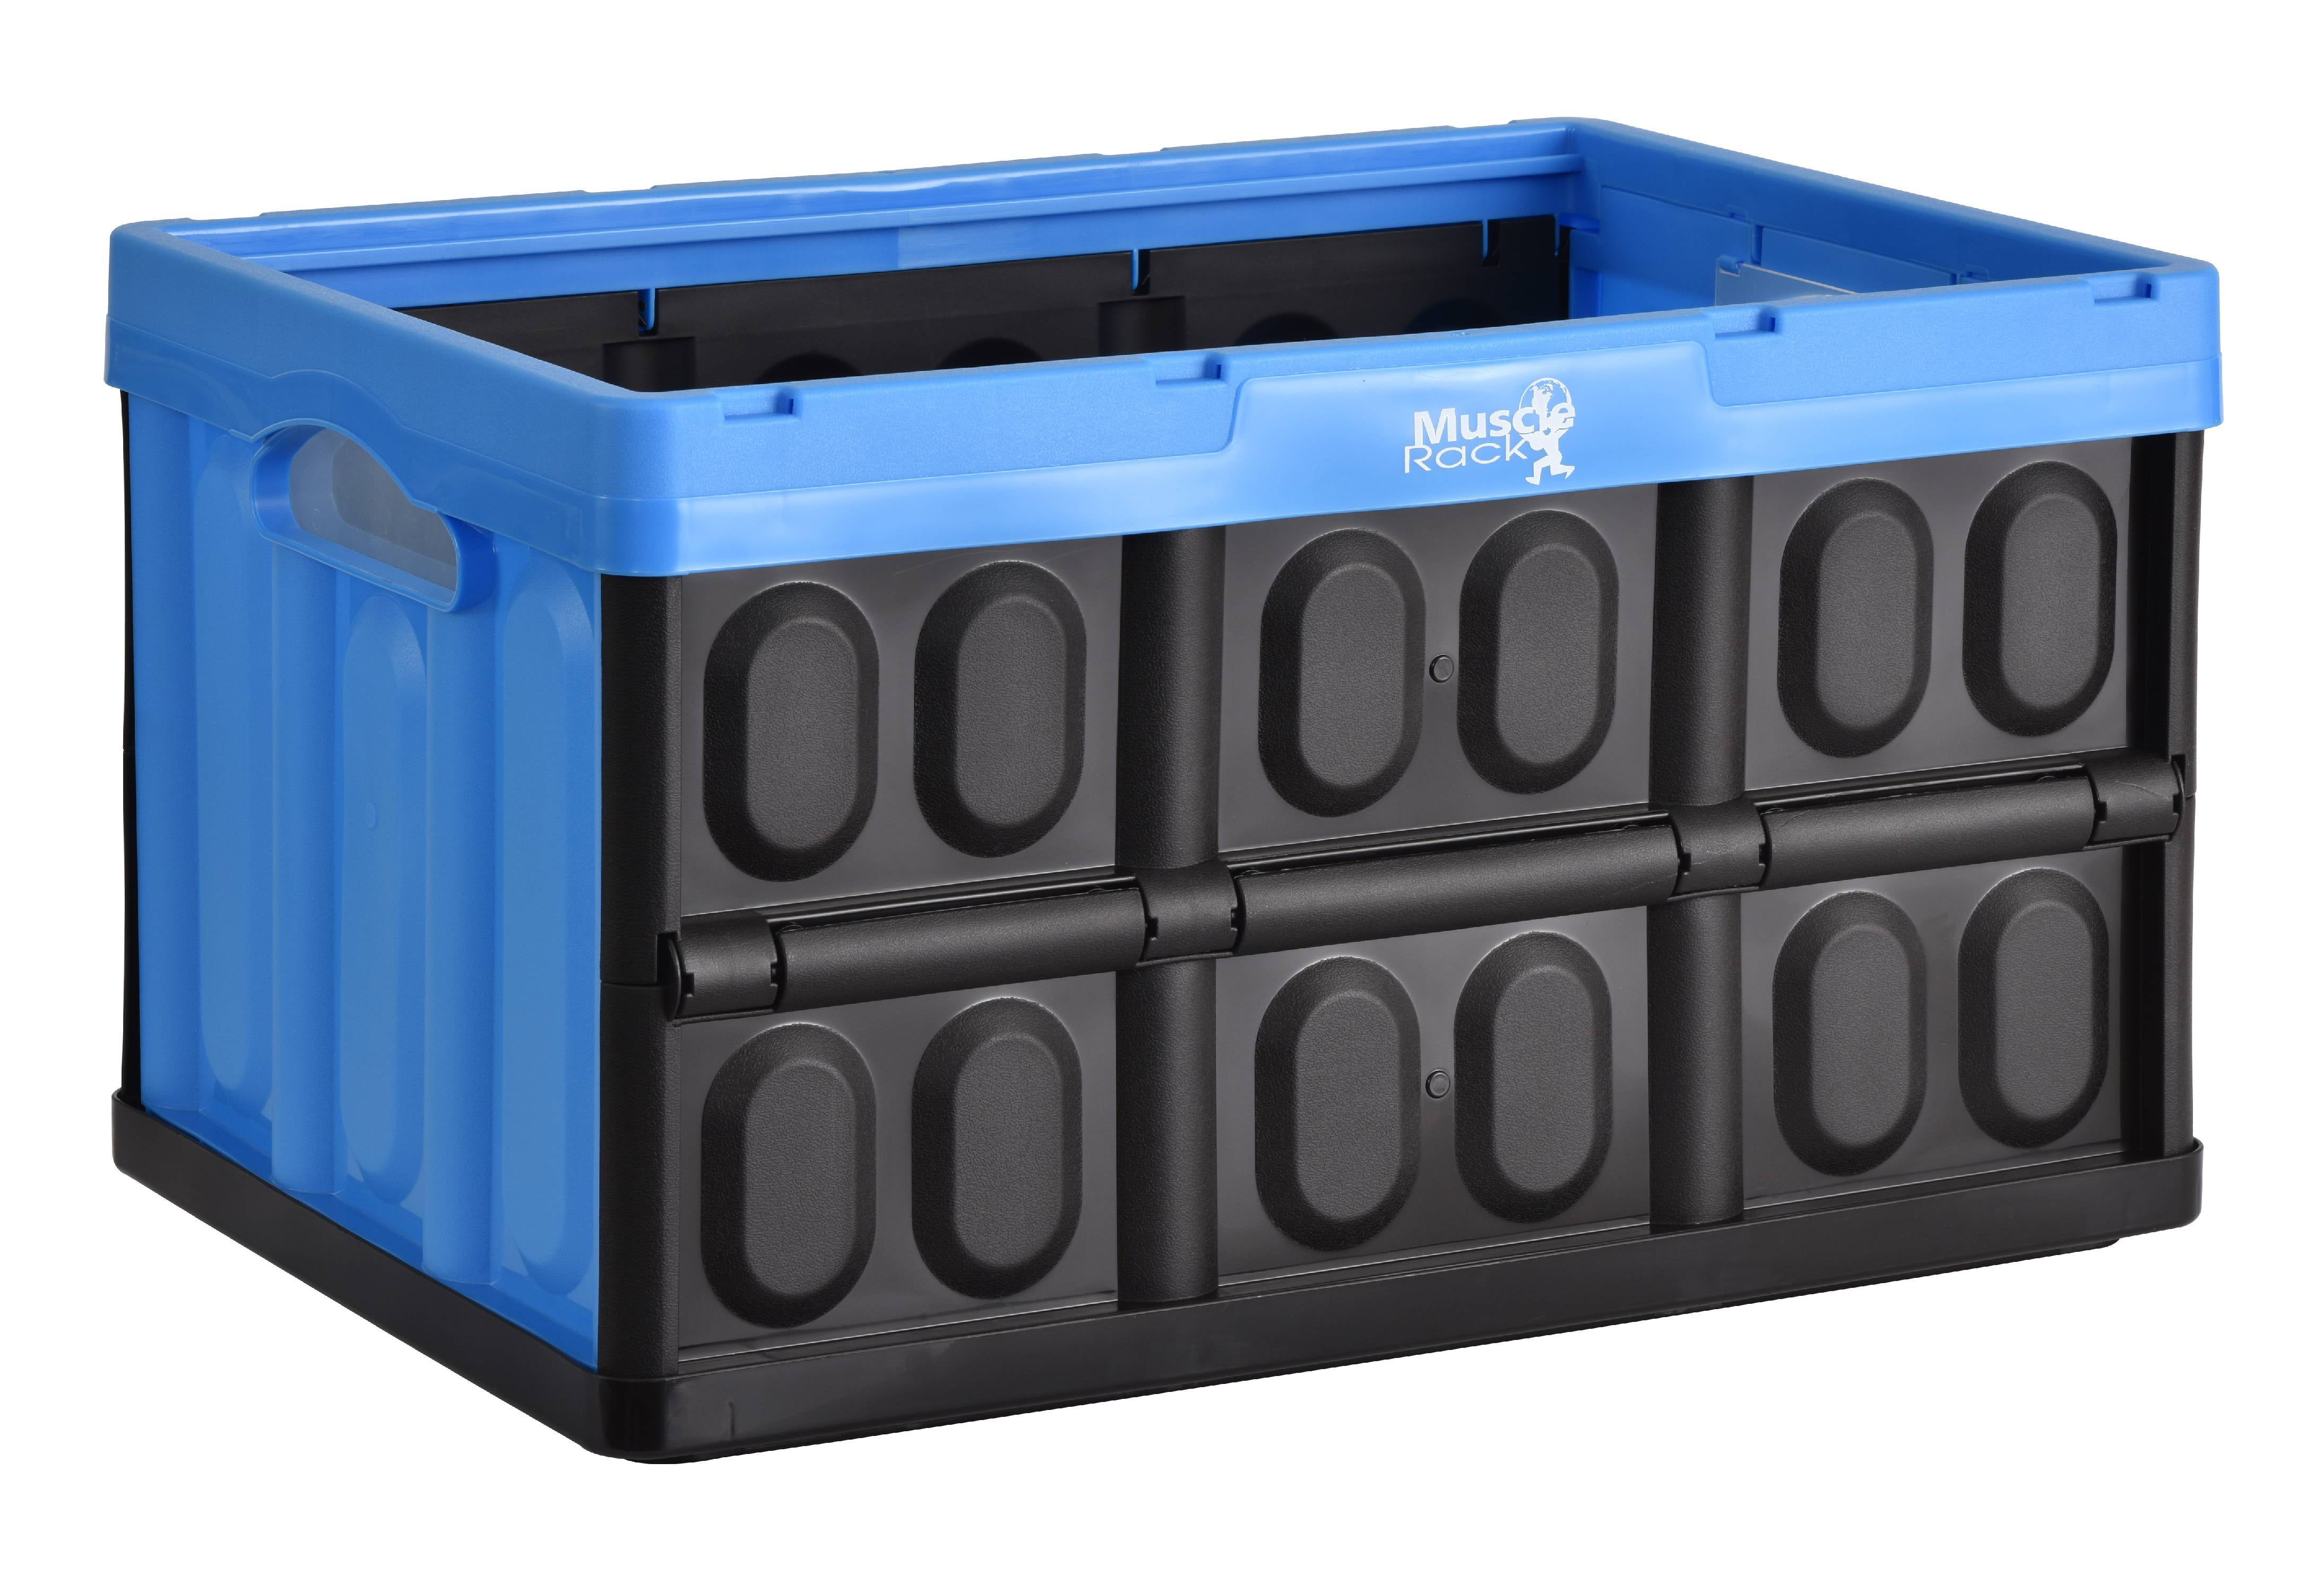 Lotus USA Foldable Stackable Cooler and Crate Blue and Black 37 Quart 35L 